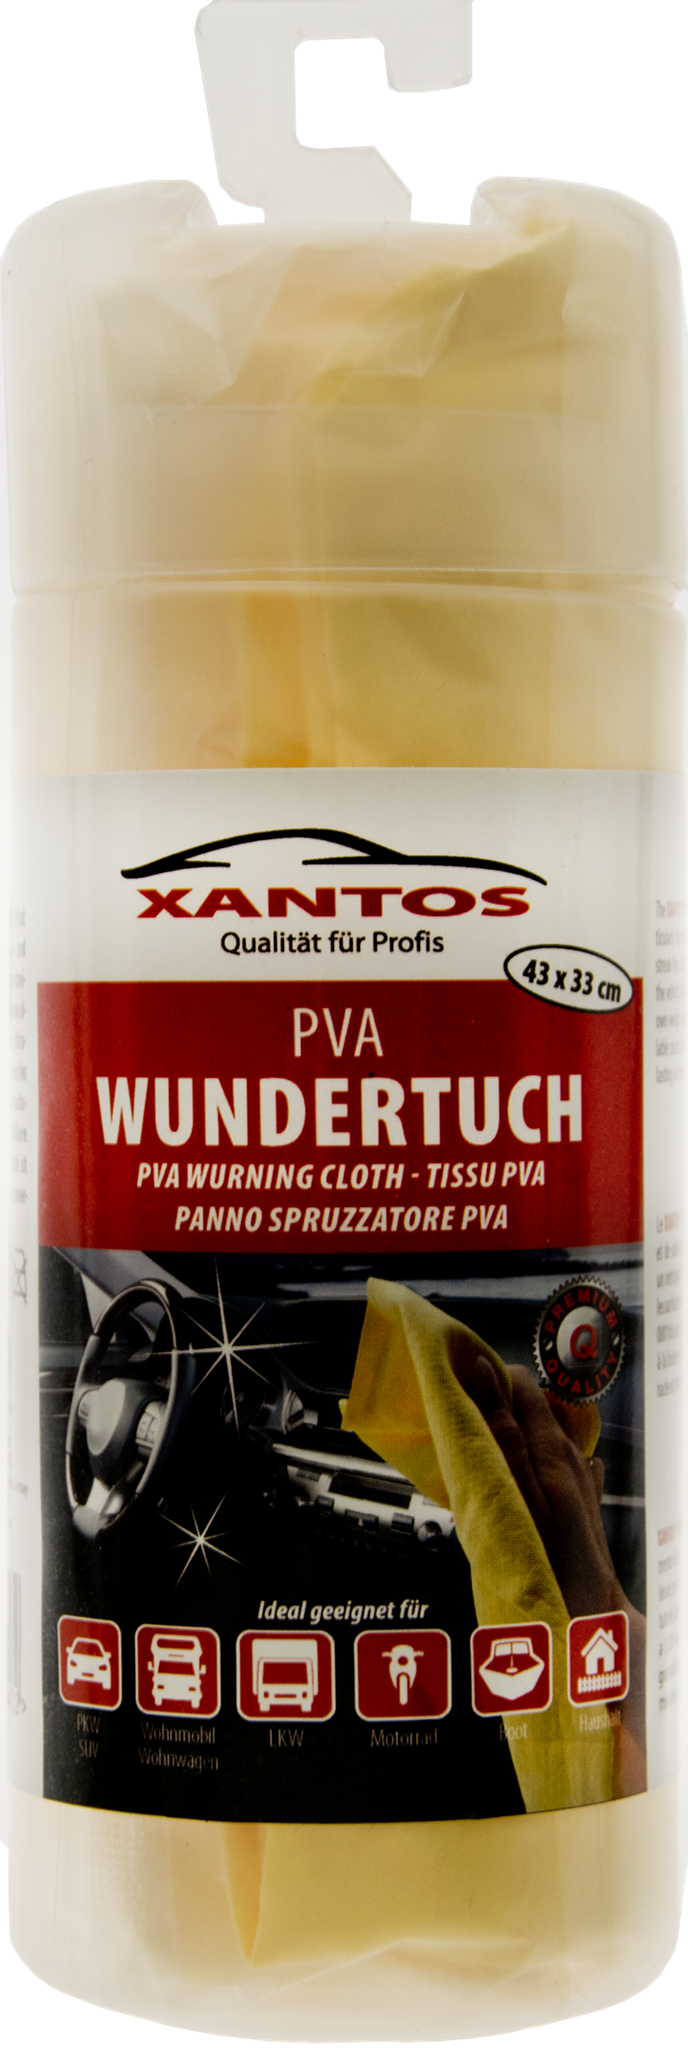 Picture of PVA-Wundertuch